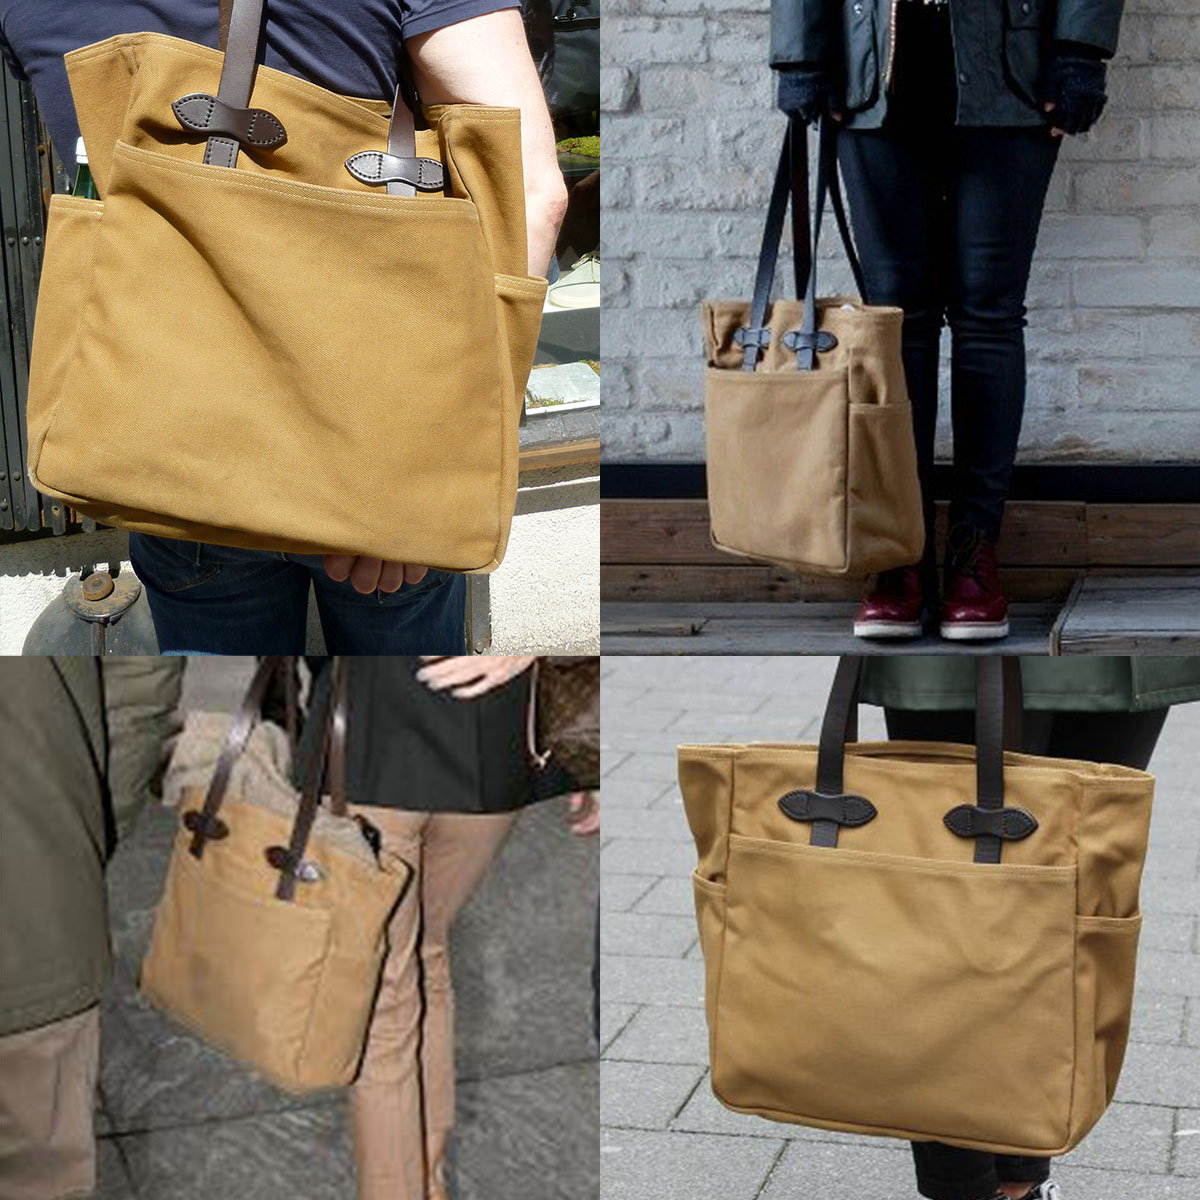 Filson Rugged Twill Tote Bag 11070260-Tan, streetwear, carry this tote right next to your body or comfortably on your shoulder